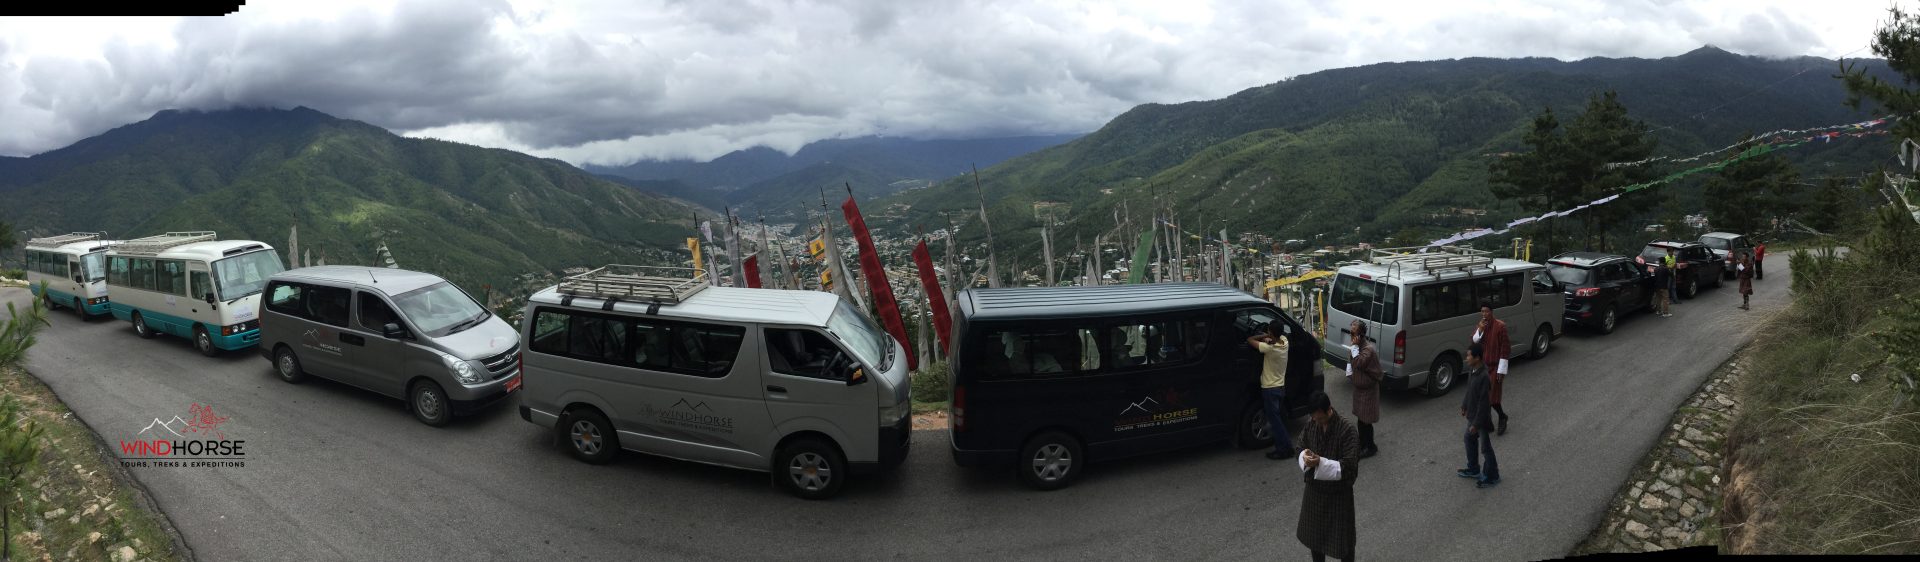 Vehicle for Tourists in Bhutan